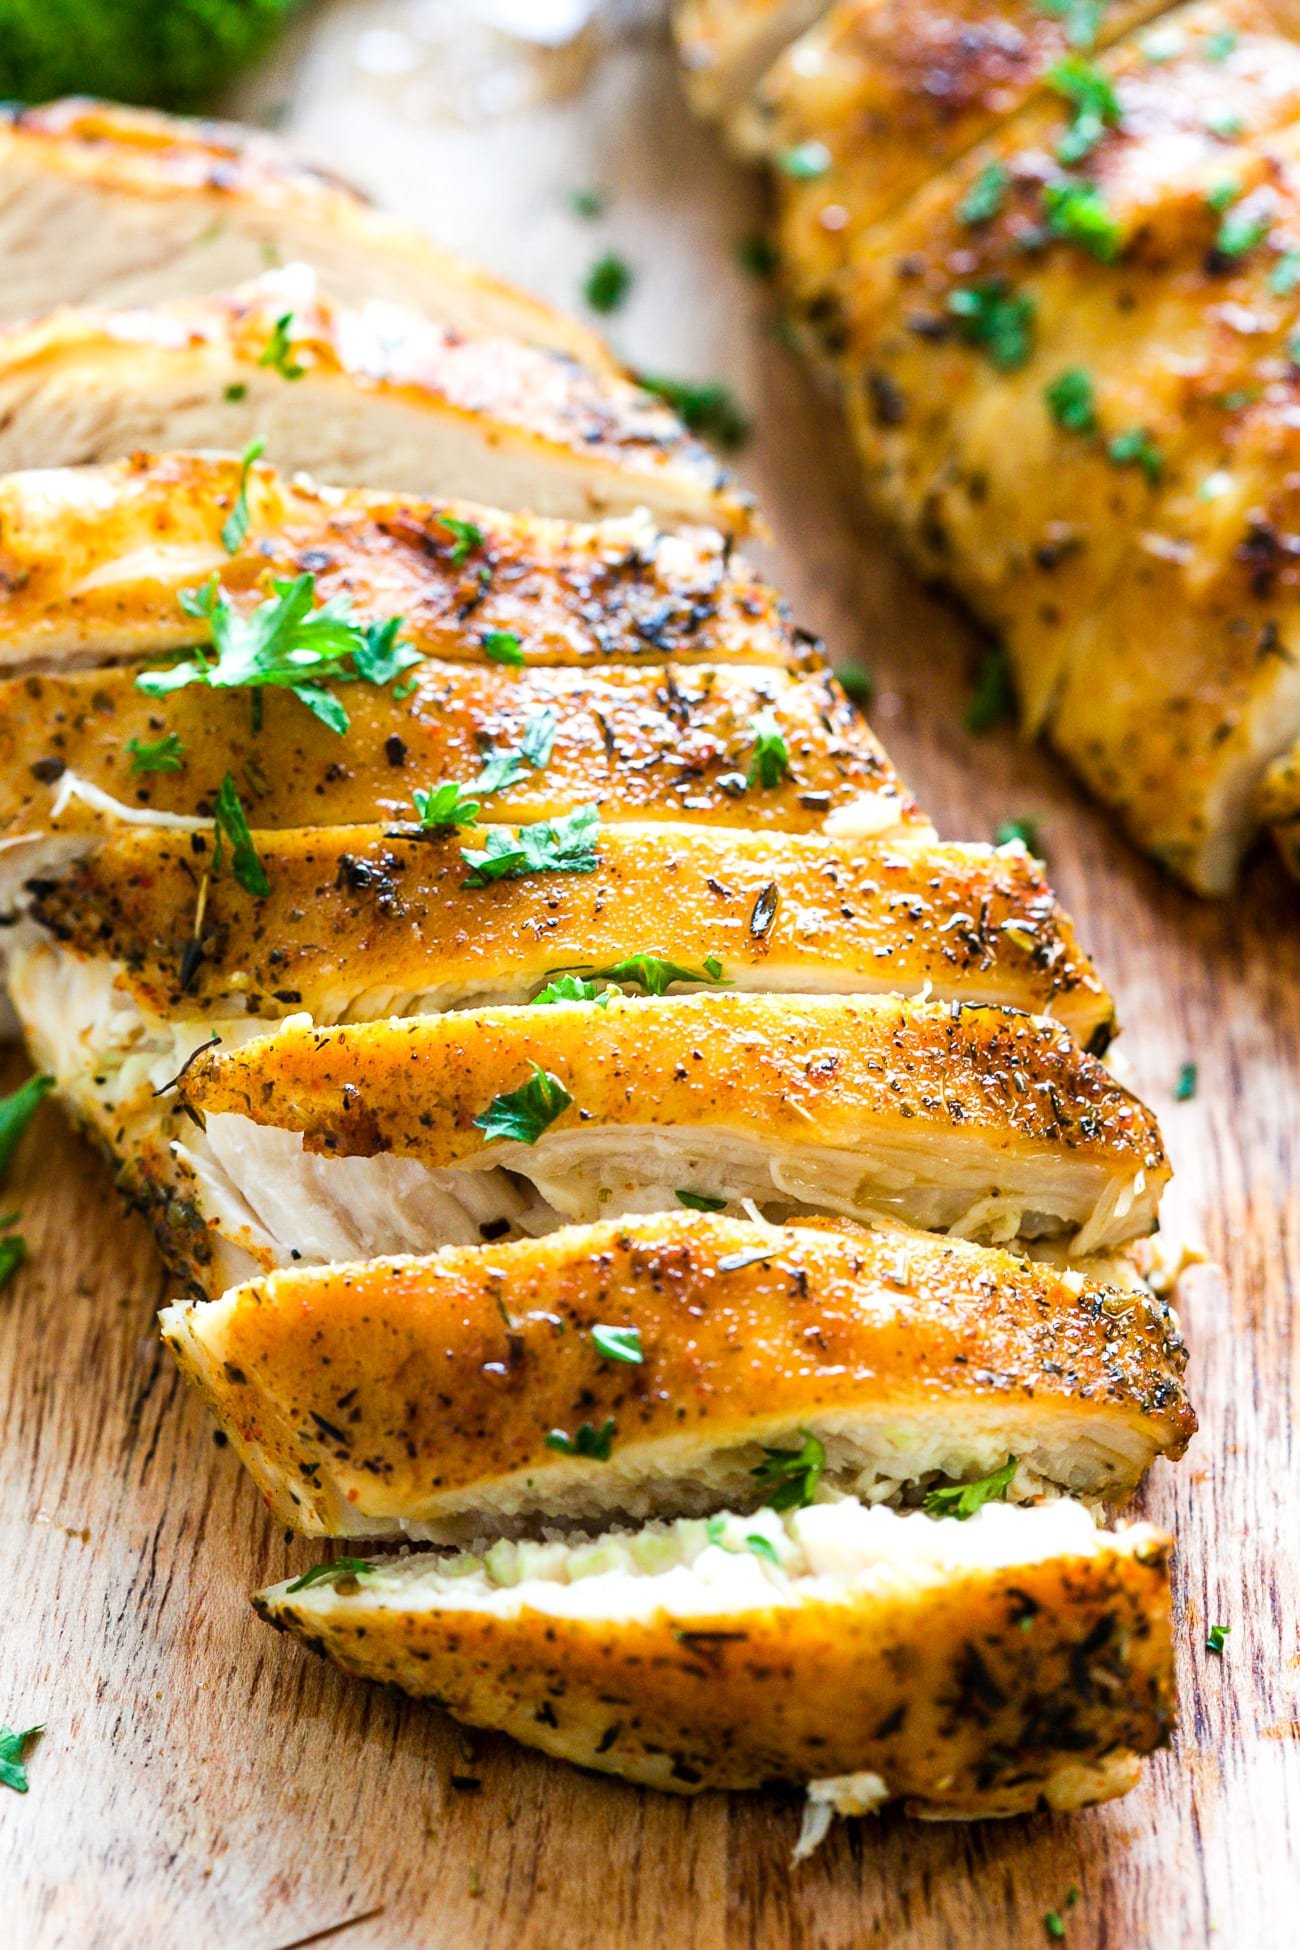 Cooked chicken breast cut into slices.